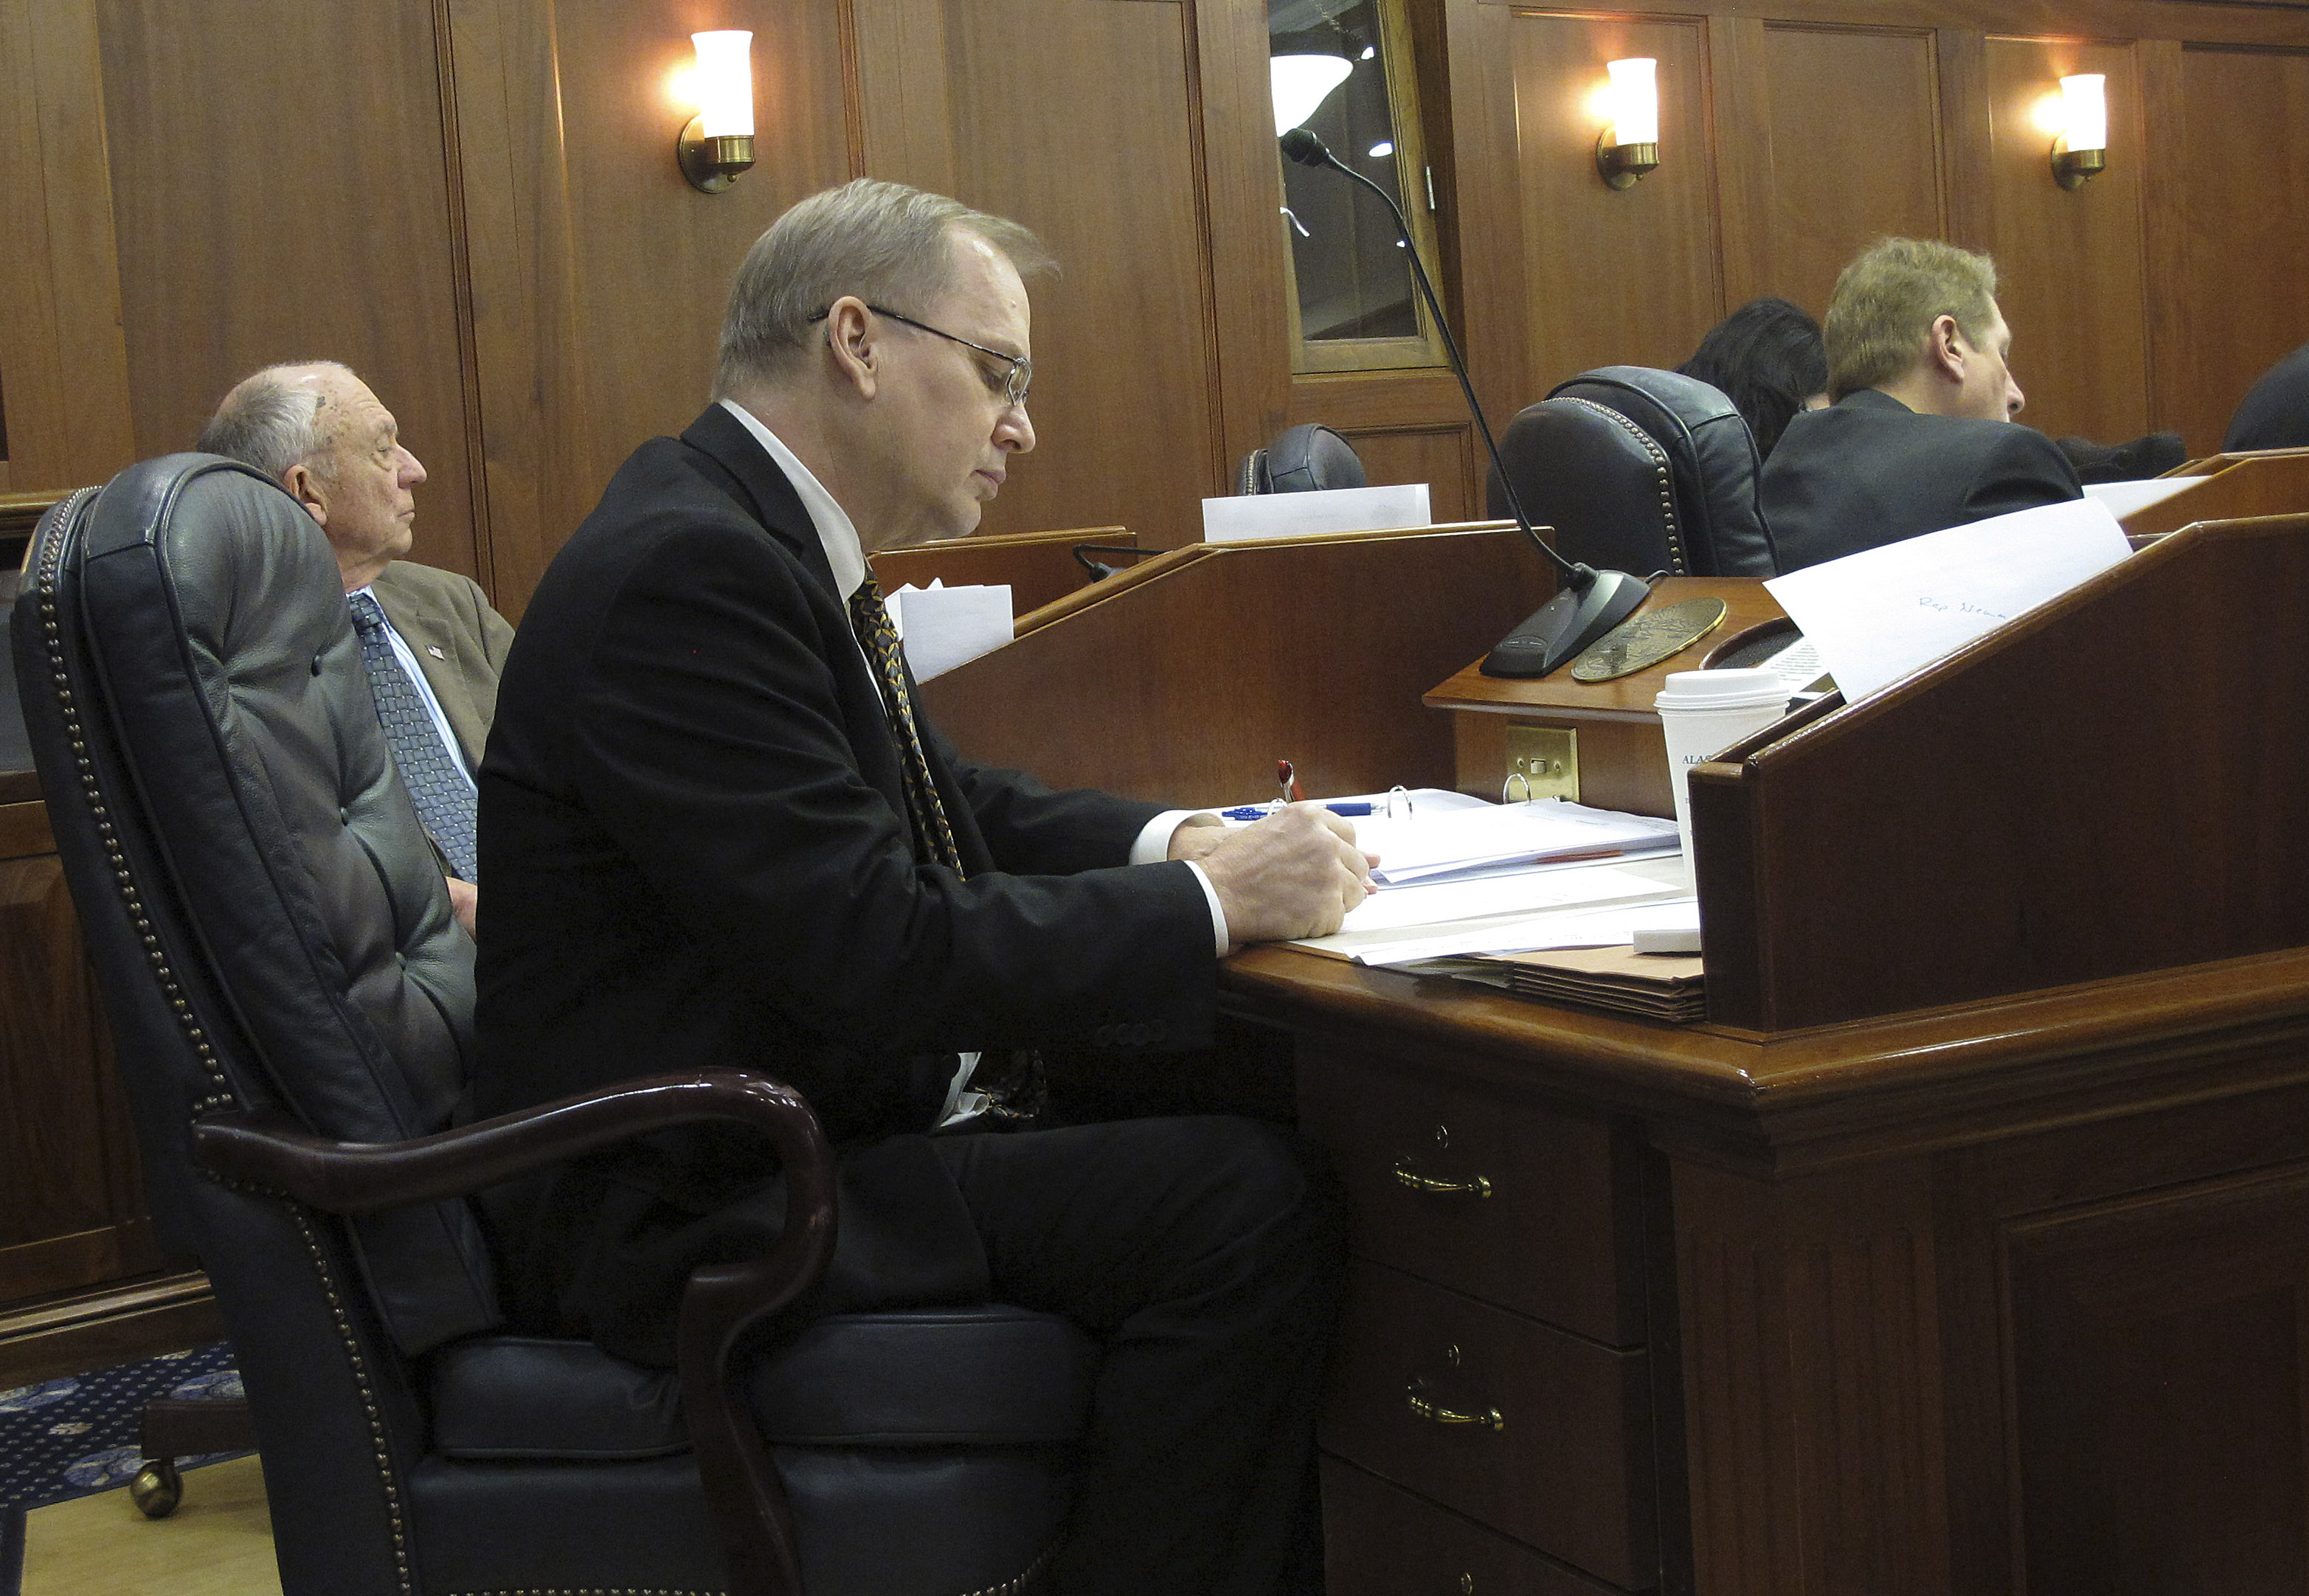 House Finance Committee co-chair Mark Neuman, R-Big Lake, center, writes at his desk on the House floor as debate gets under way on proposed amendments to the state operating budget on Thursday, March 12, 2015, in Juneau, Alaska.